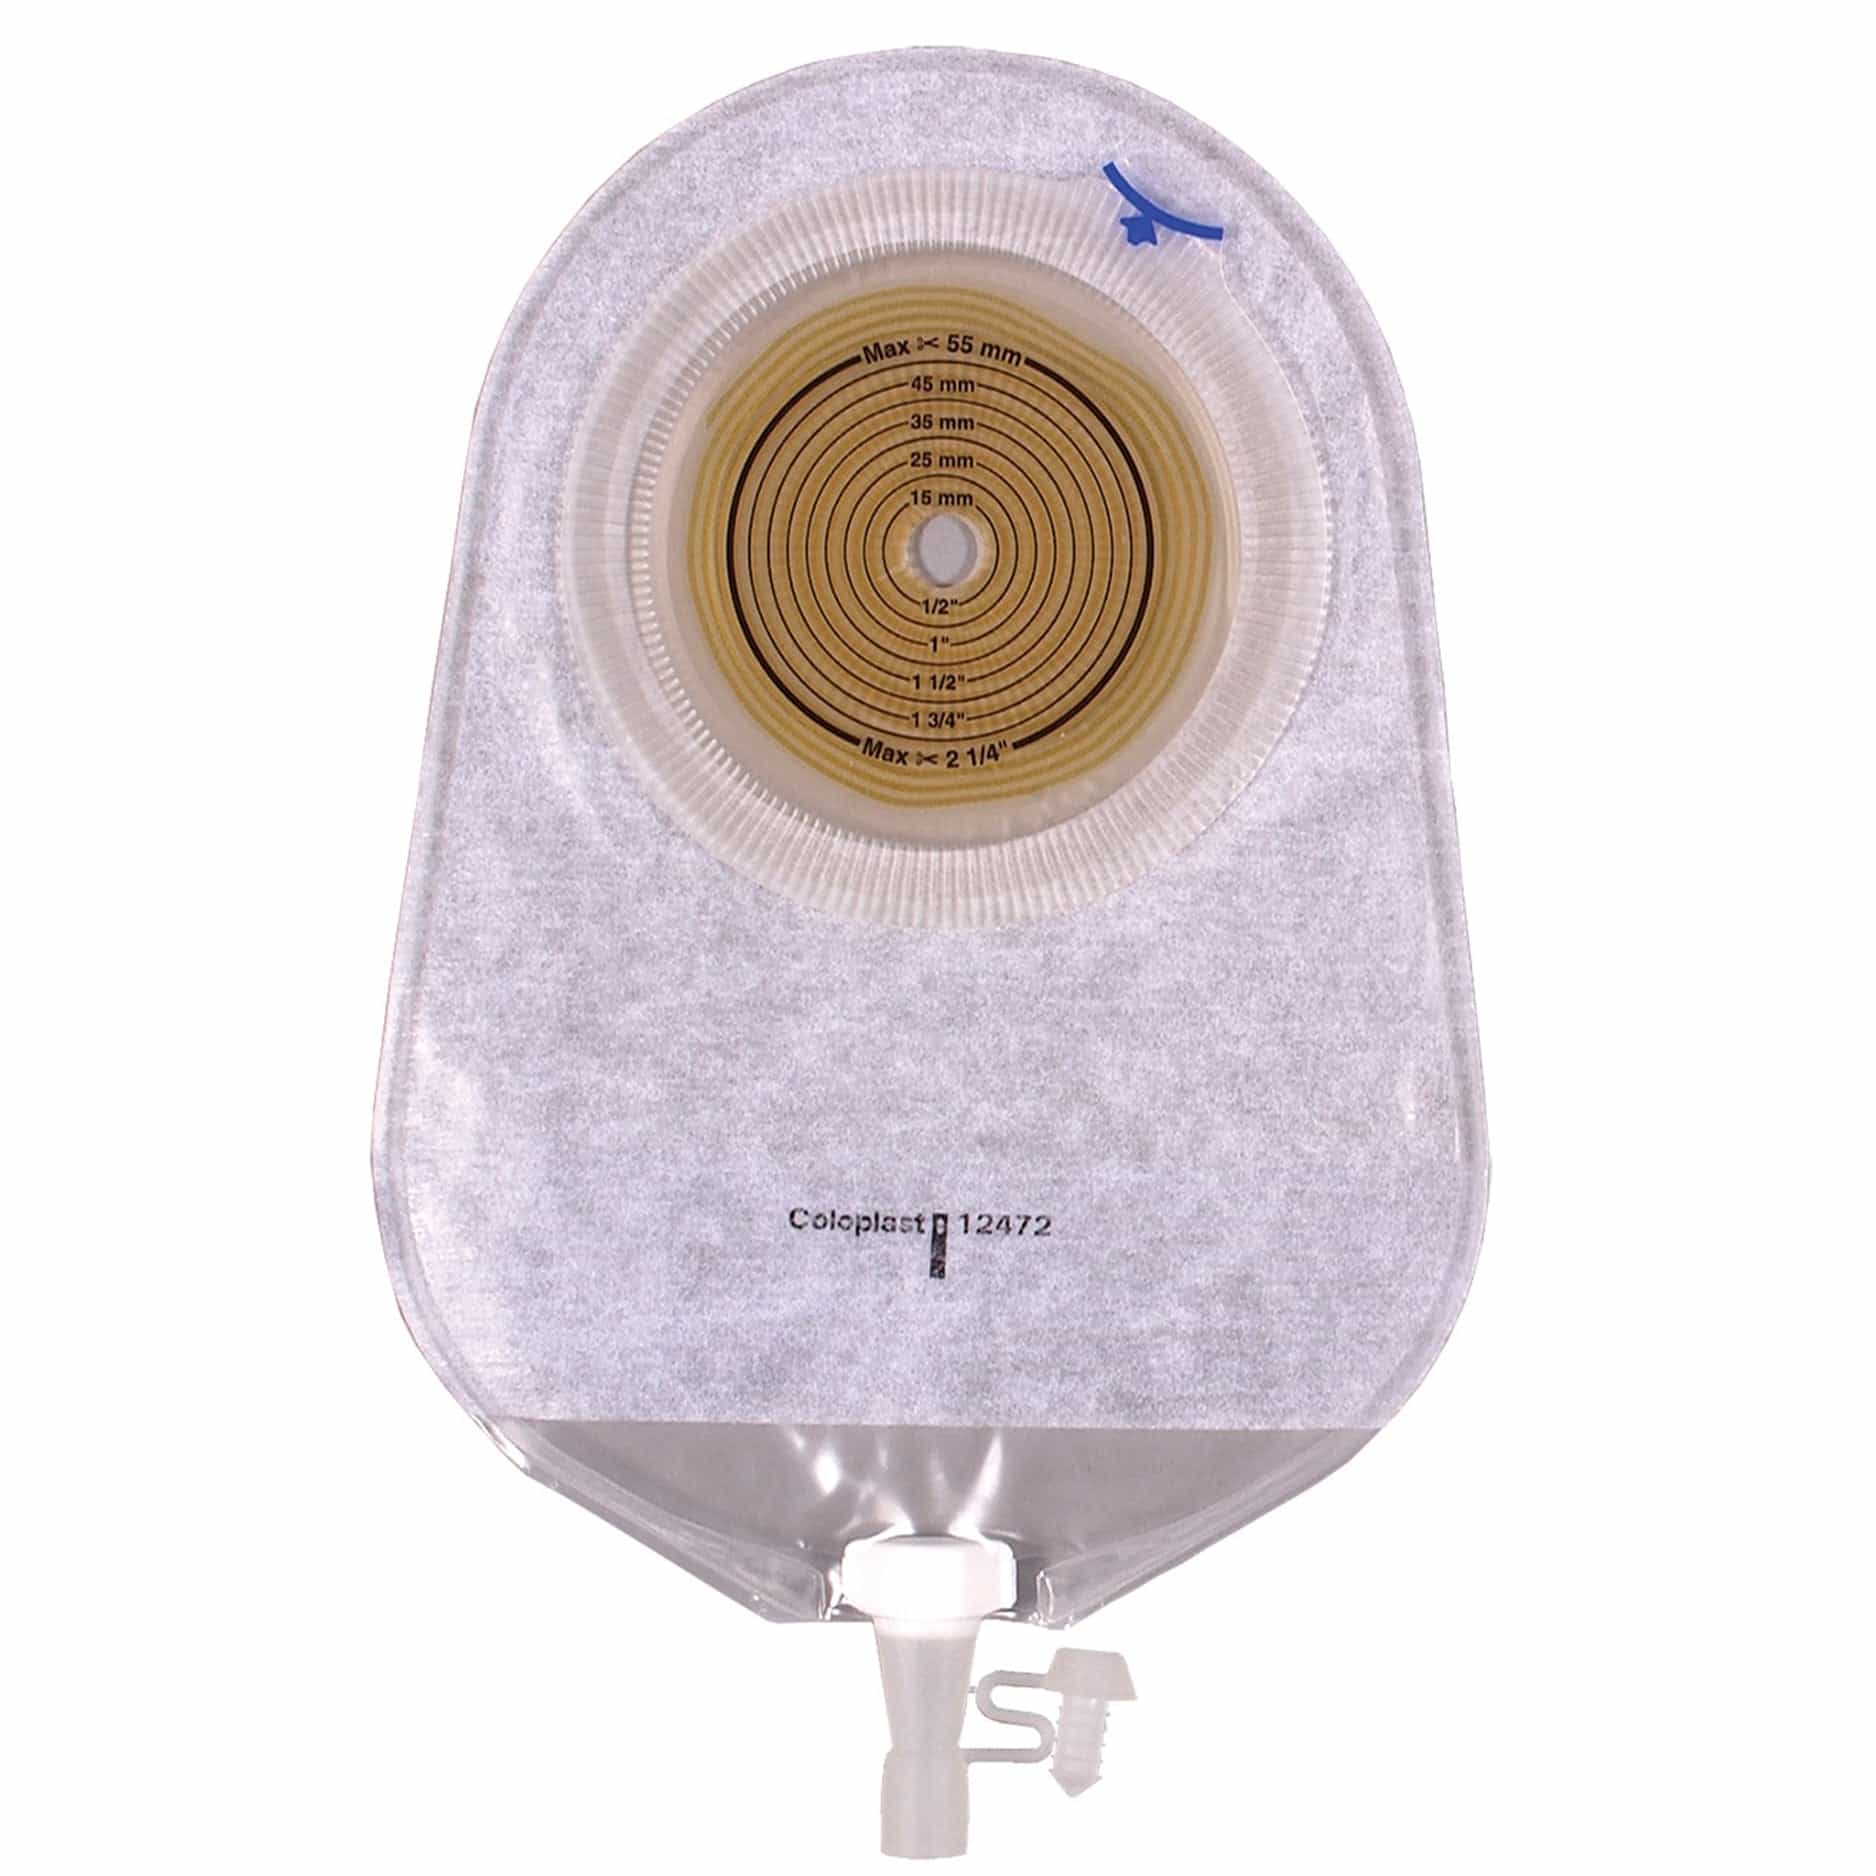 COL 12432 Assura 1-piece urostomy pouch with spiral adhesive and secure outlet, available in transparent and opaque versions, designed for comfort and protection.